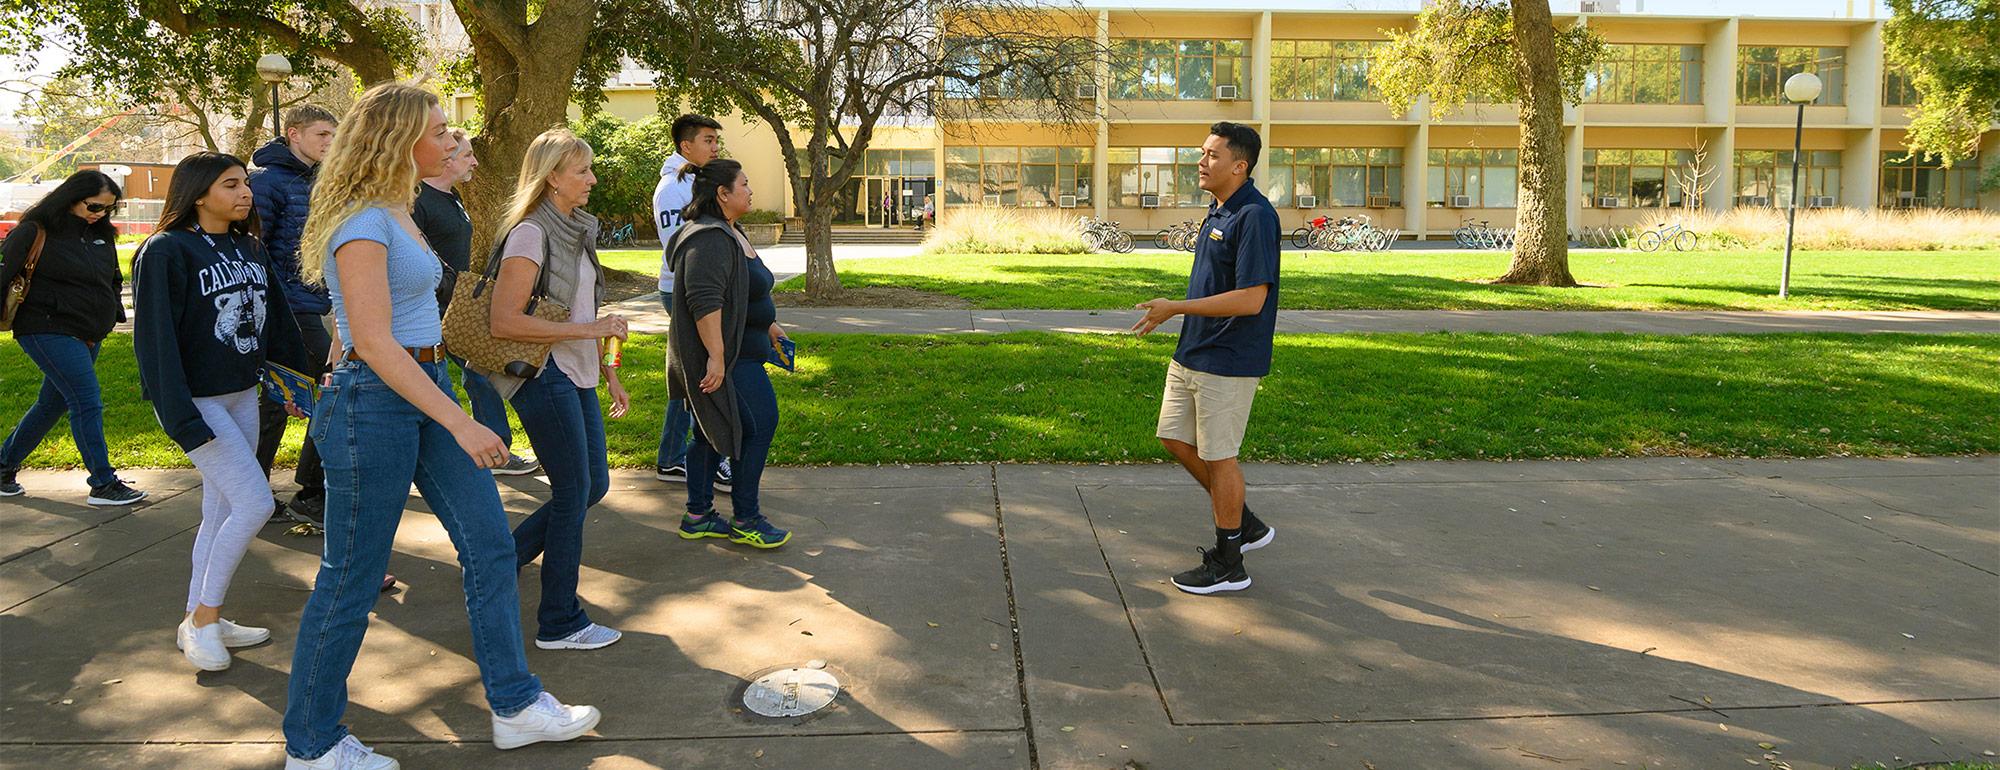 a student tour guide leading a group of people on a campus tour